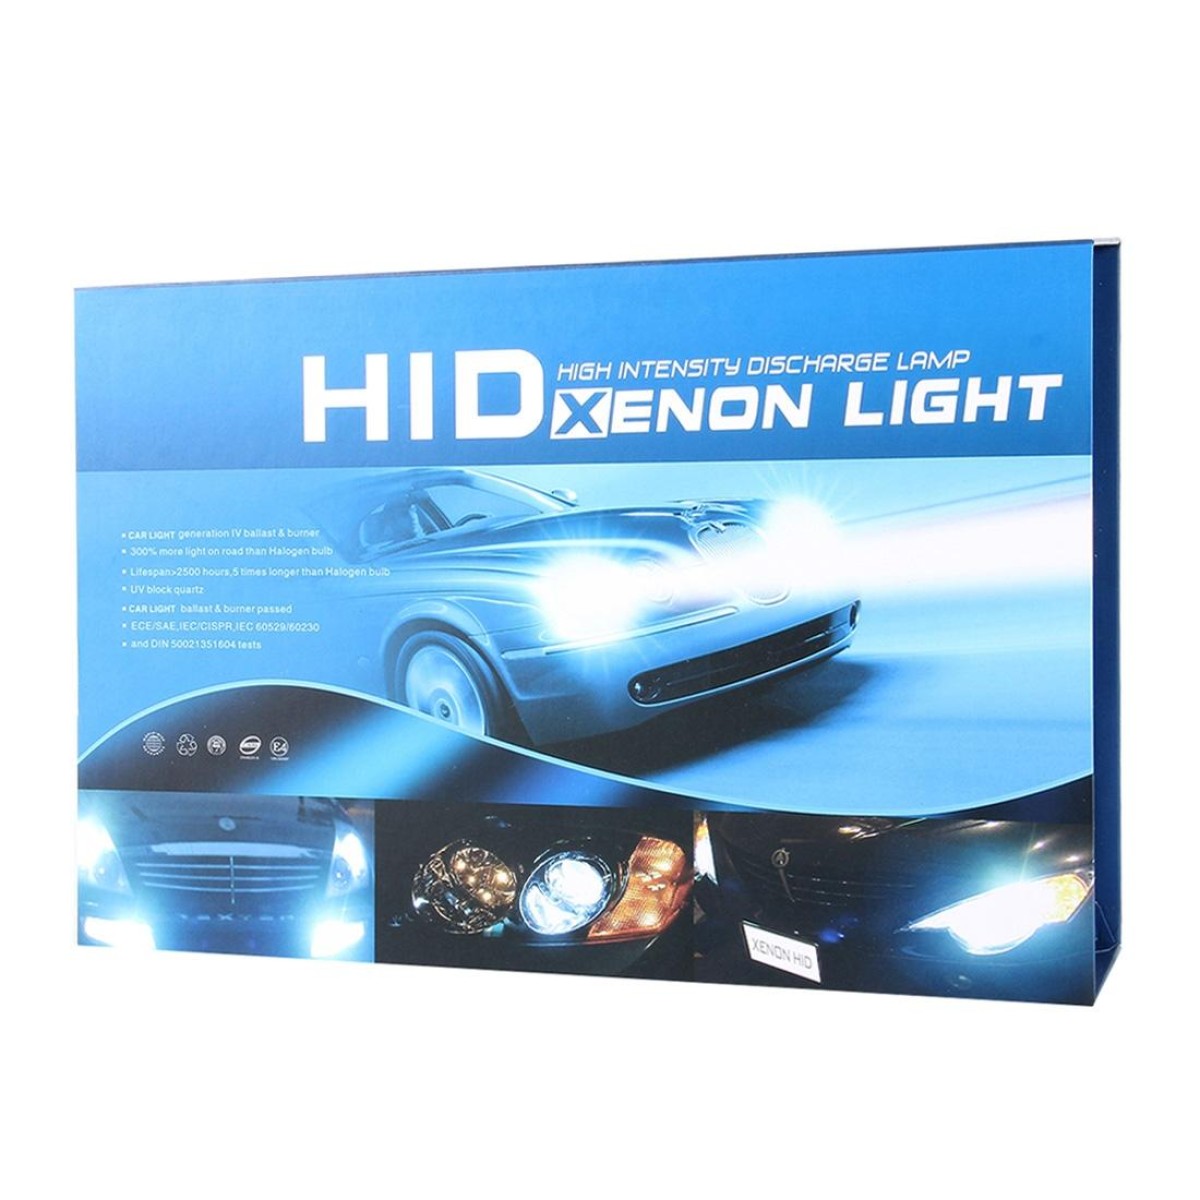 35W 2x H11 Slim HID Xenon Light, High Intensity Discharge Lamp, Color Temperature: 8000K